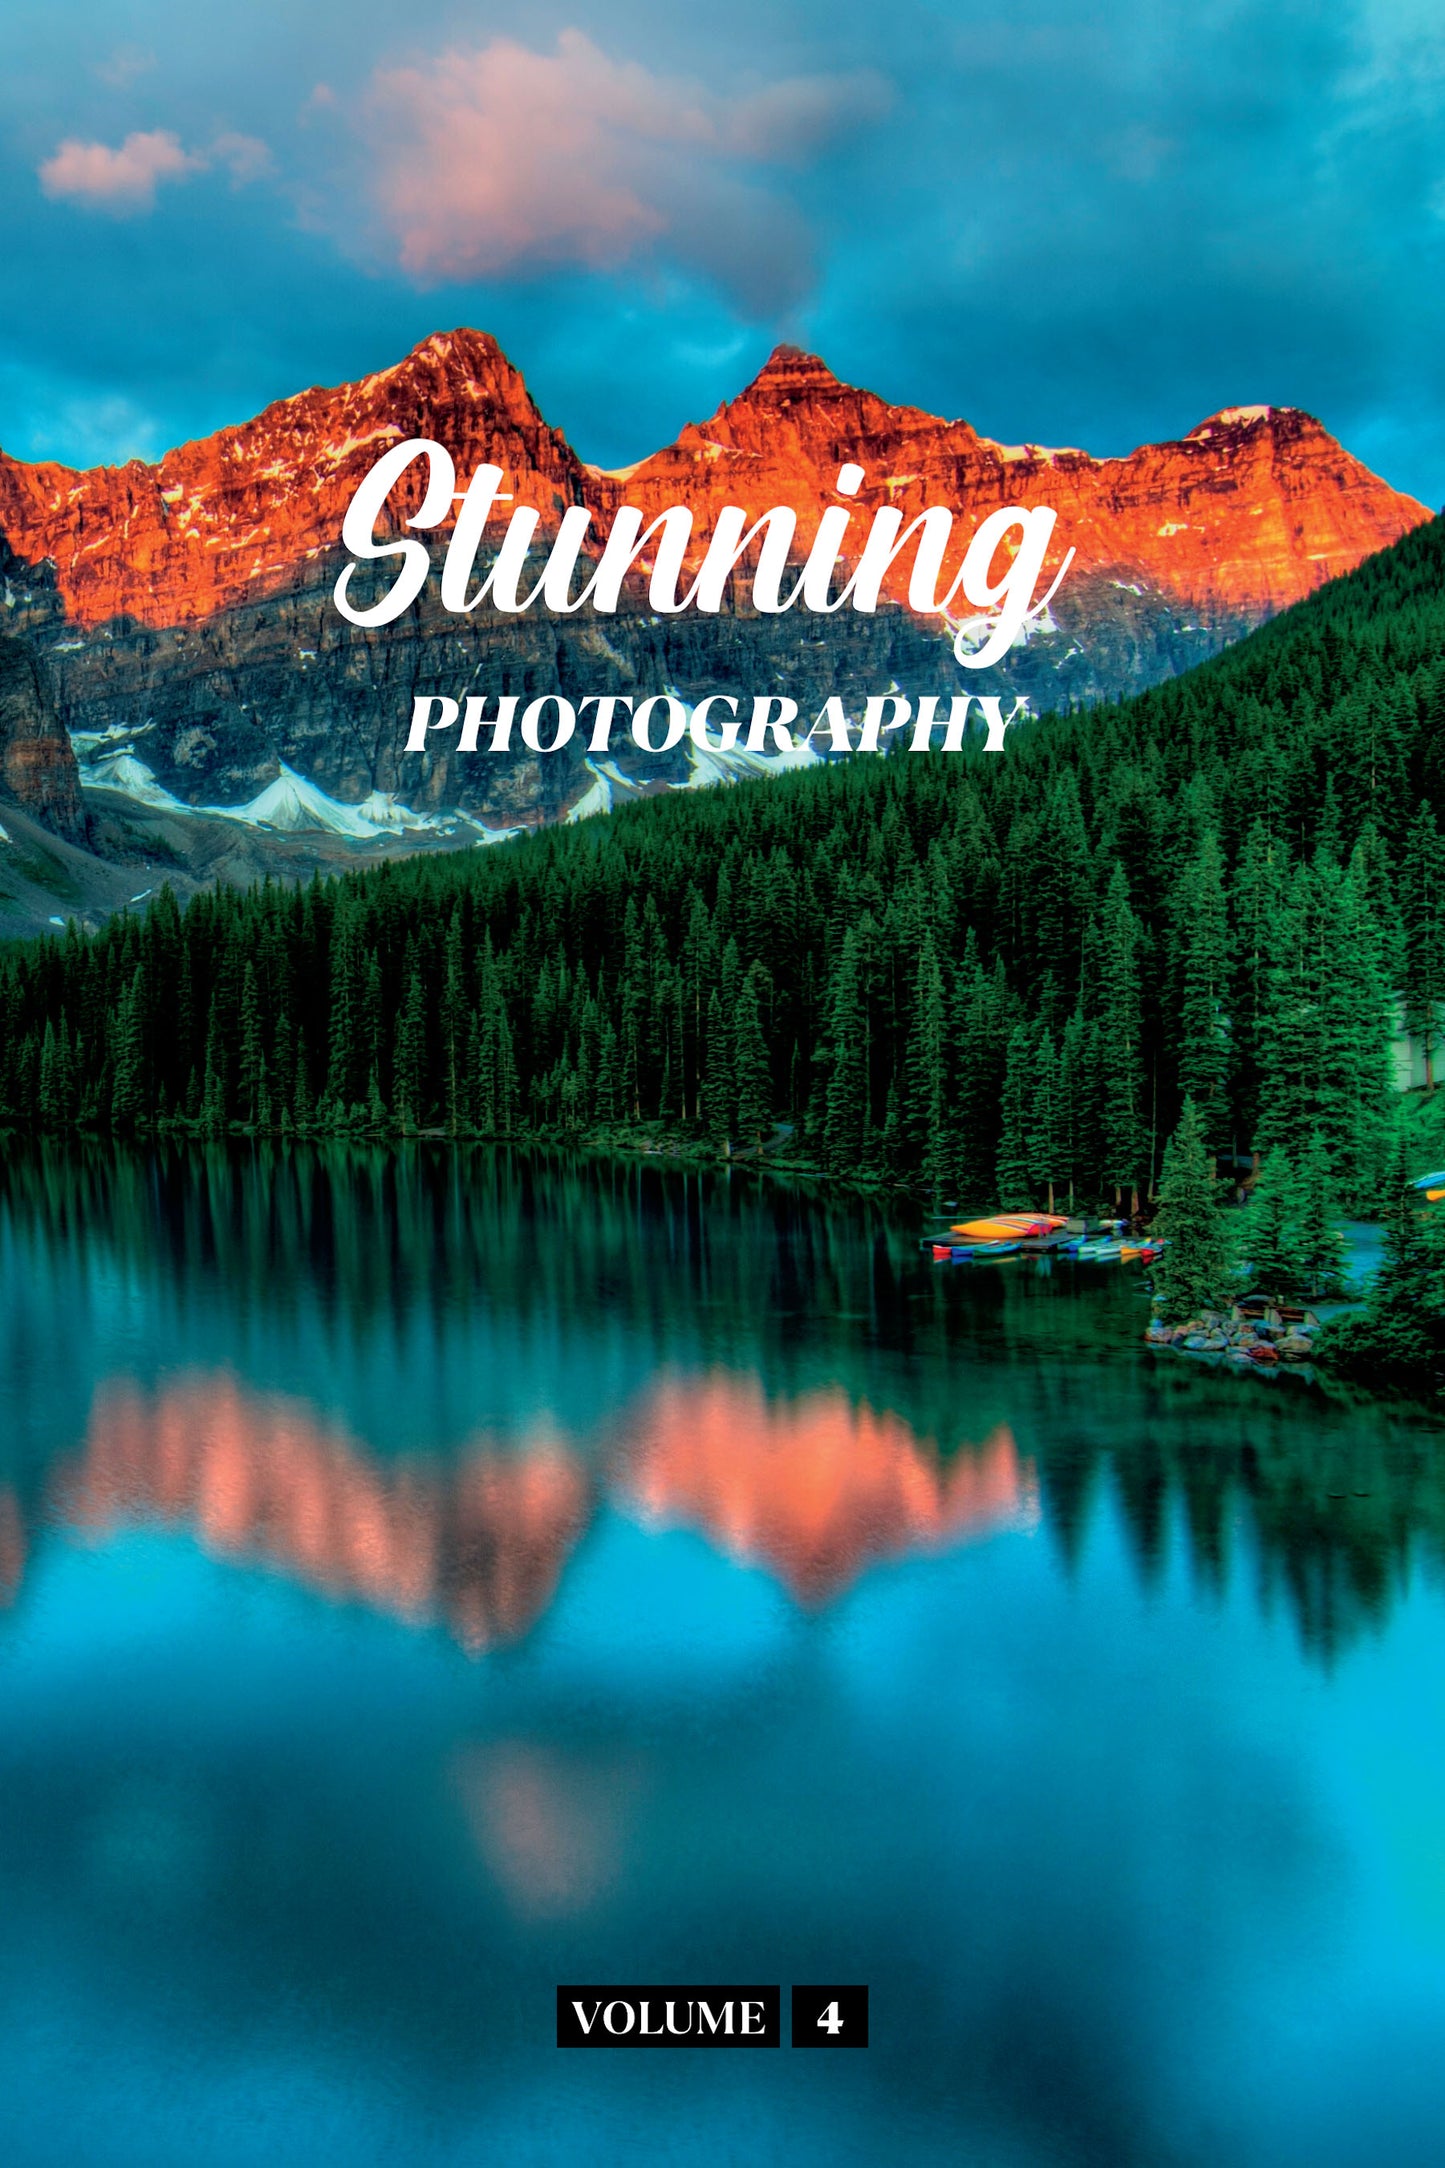 Stunning Photography Volume 4 (Physical Book)